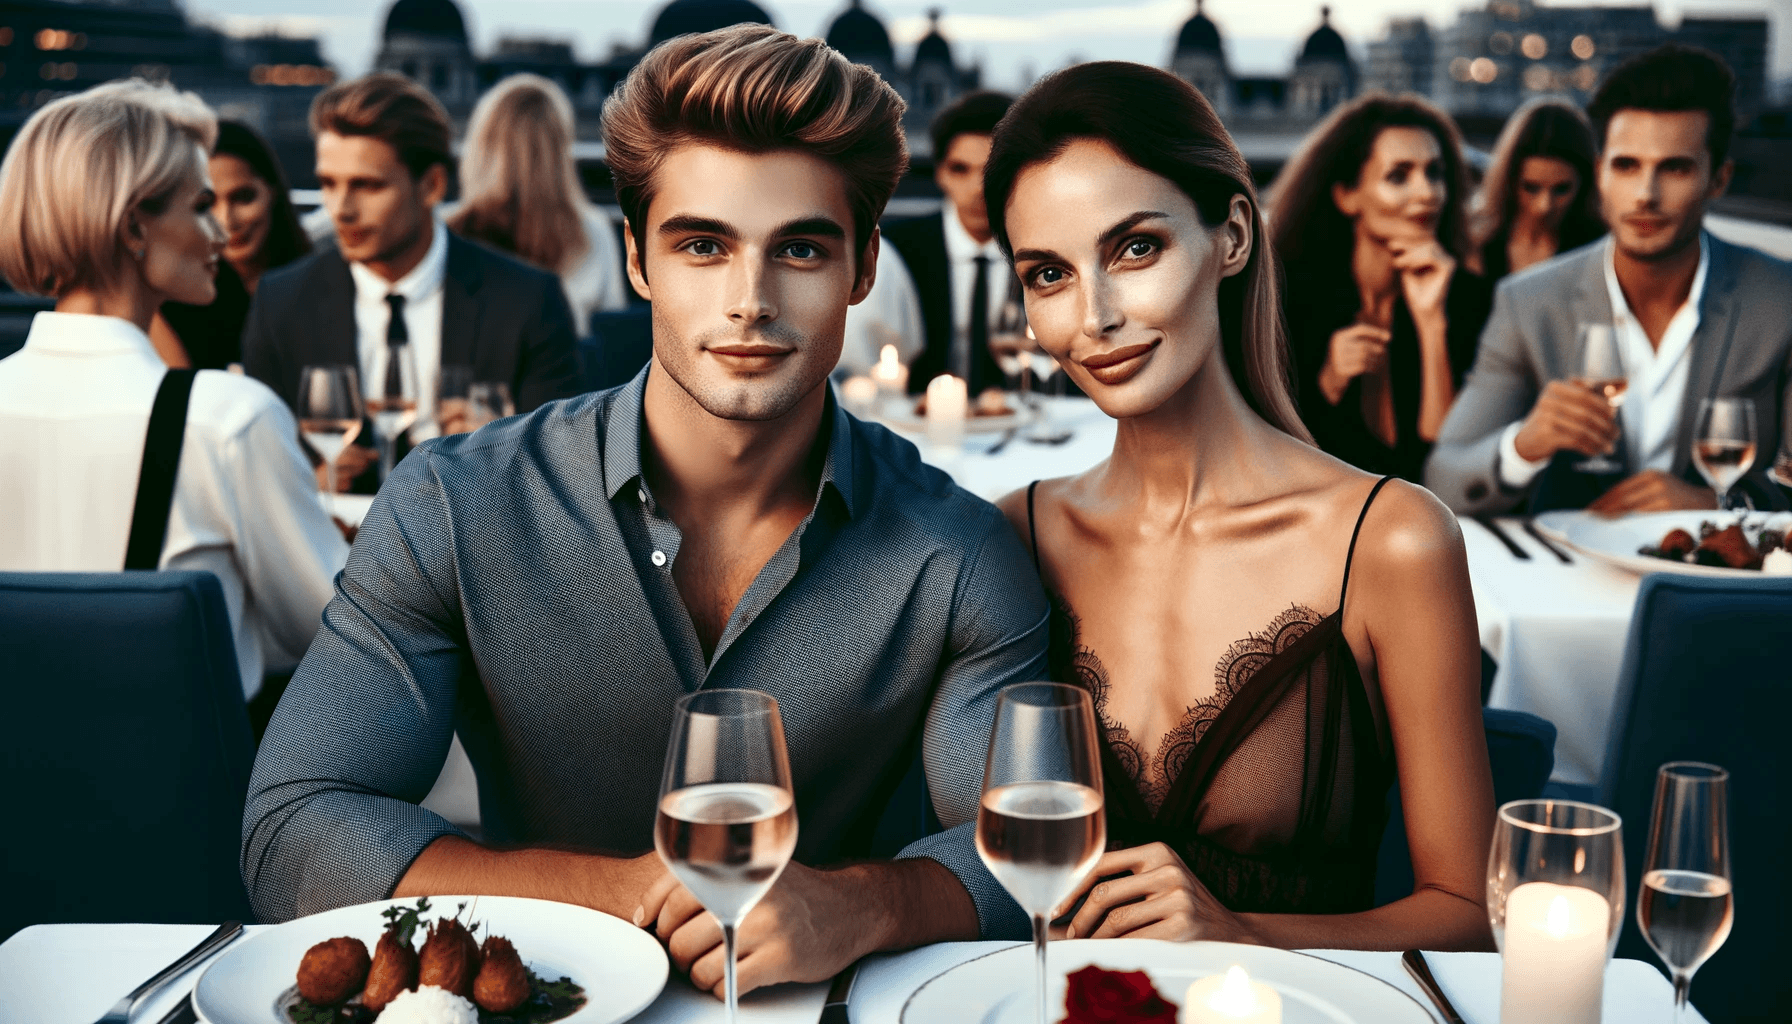 couple at a romantic rooftop dinner date. The man looks quite young resembling a university undergraduate with a clean sh